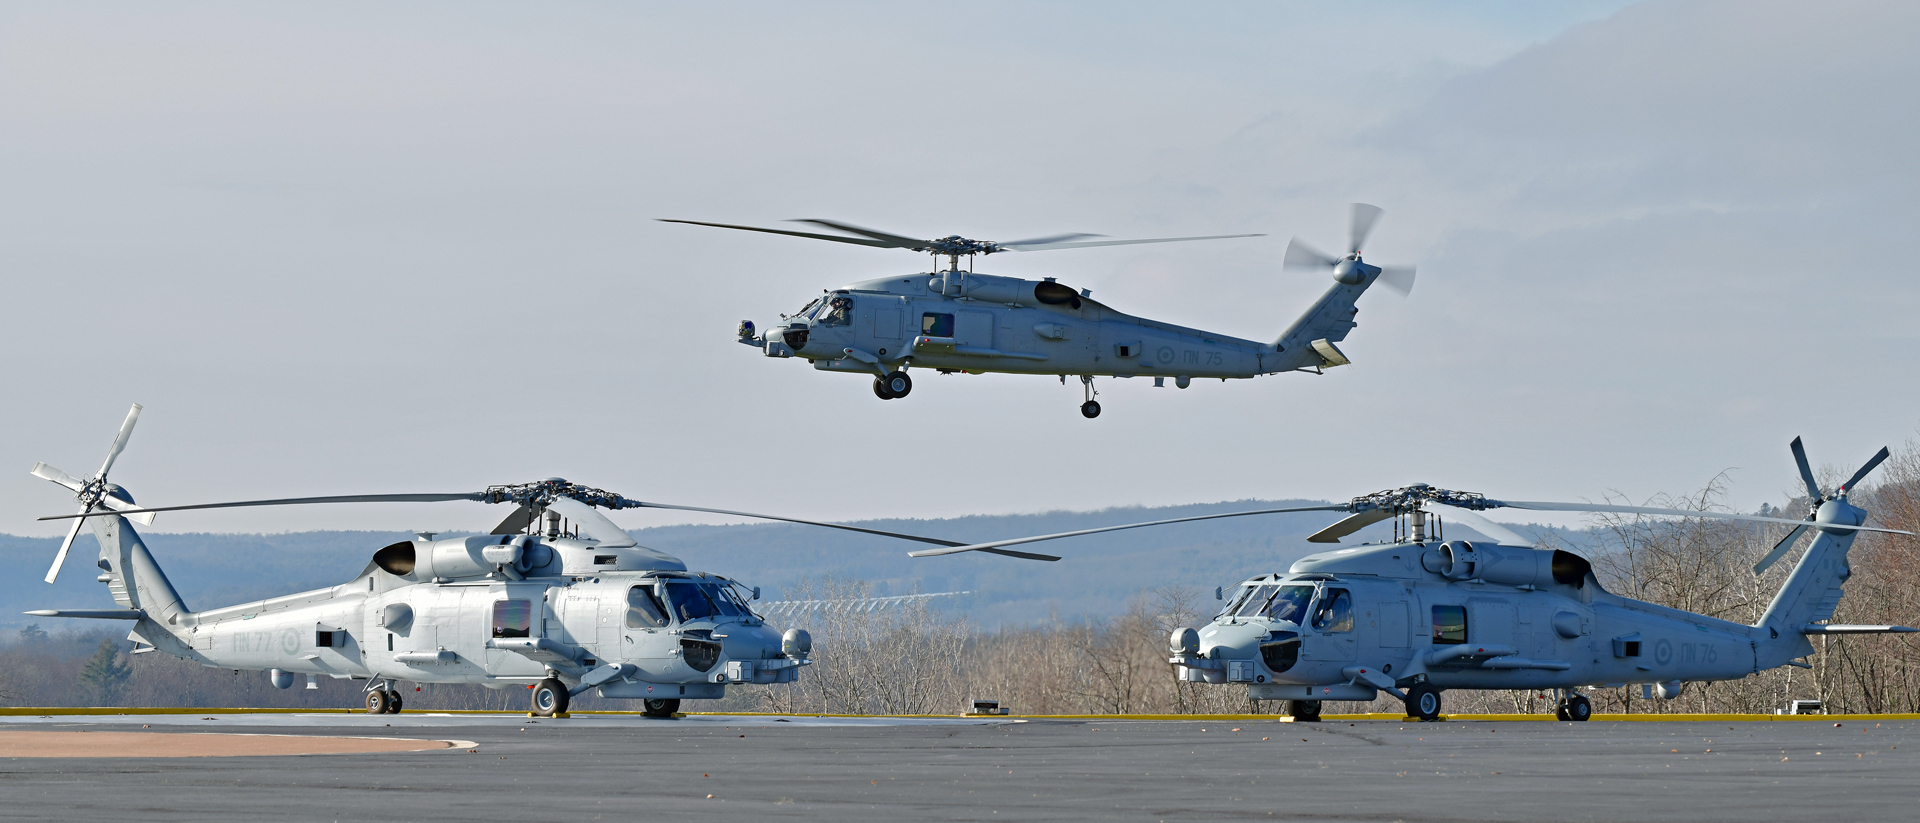 MH-60R SEAHAWK® helicopters for the Hellenic Navy await transfer to the U.S. Navy ahead of delivery to Greece in 2024. Photo by Lockheed Martin